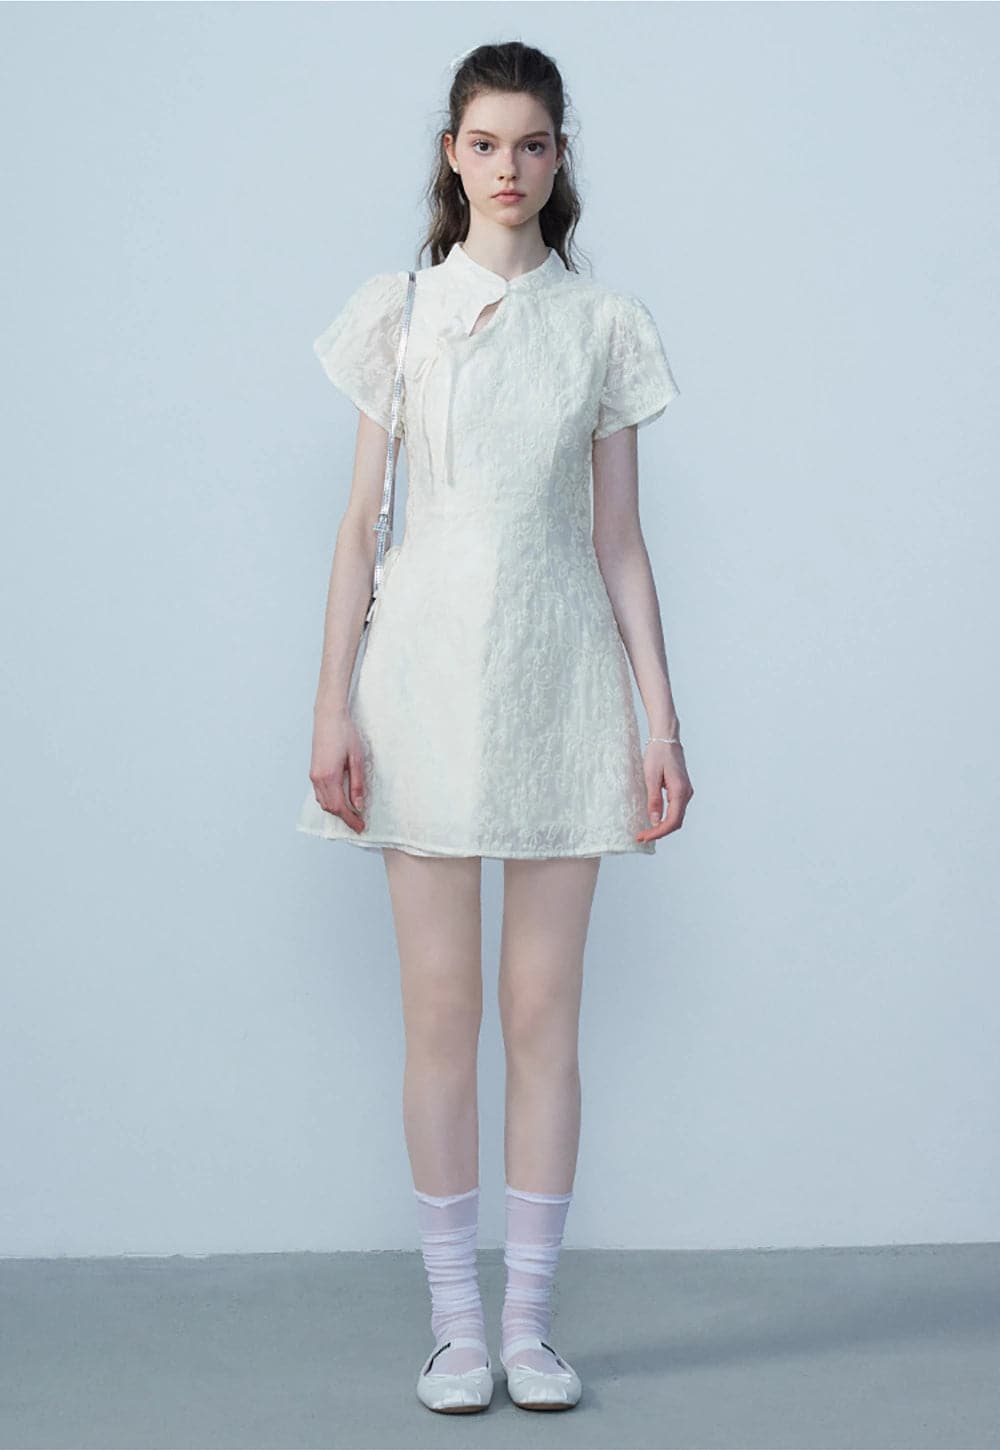 Apricot Knee-Length Lace-Trimmed Dress